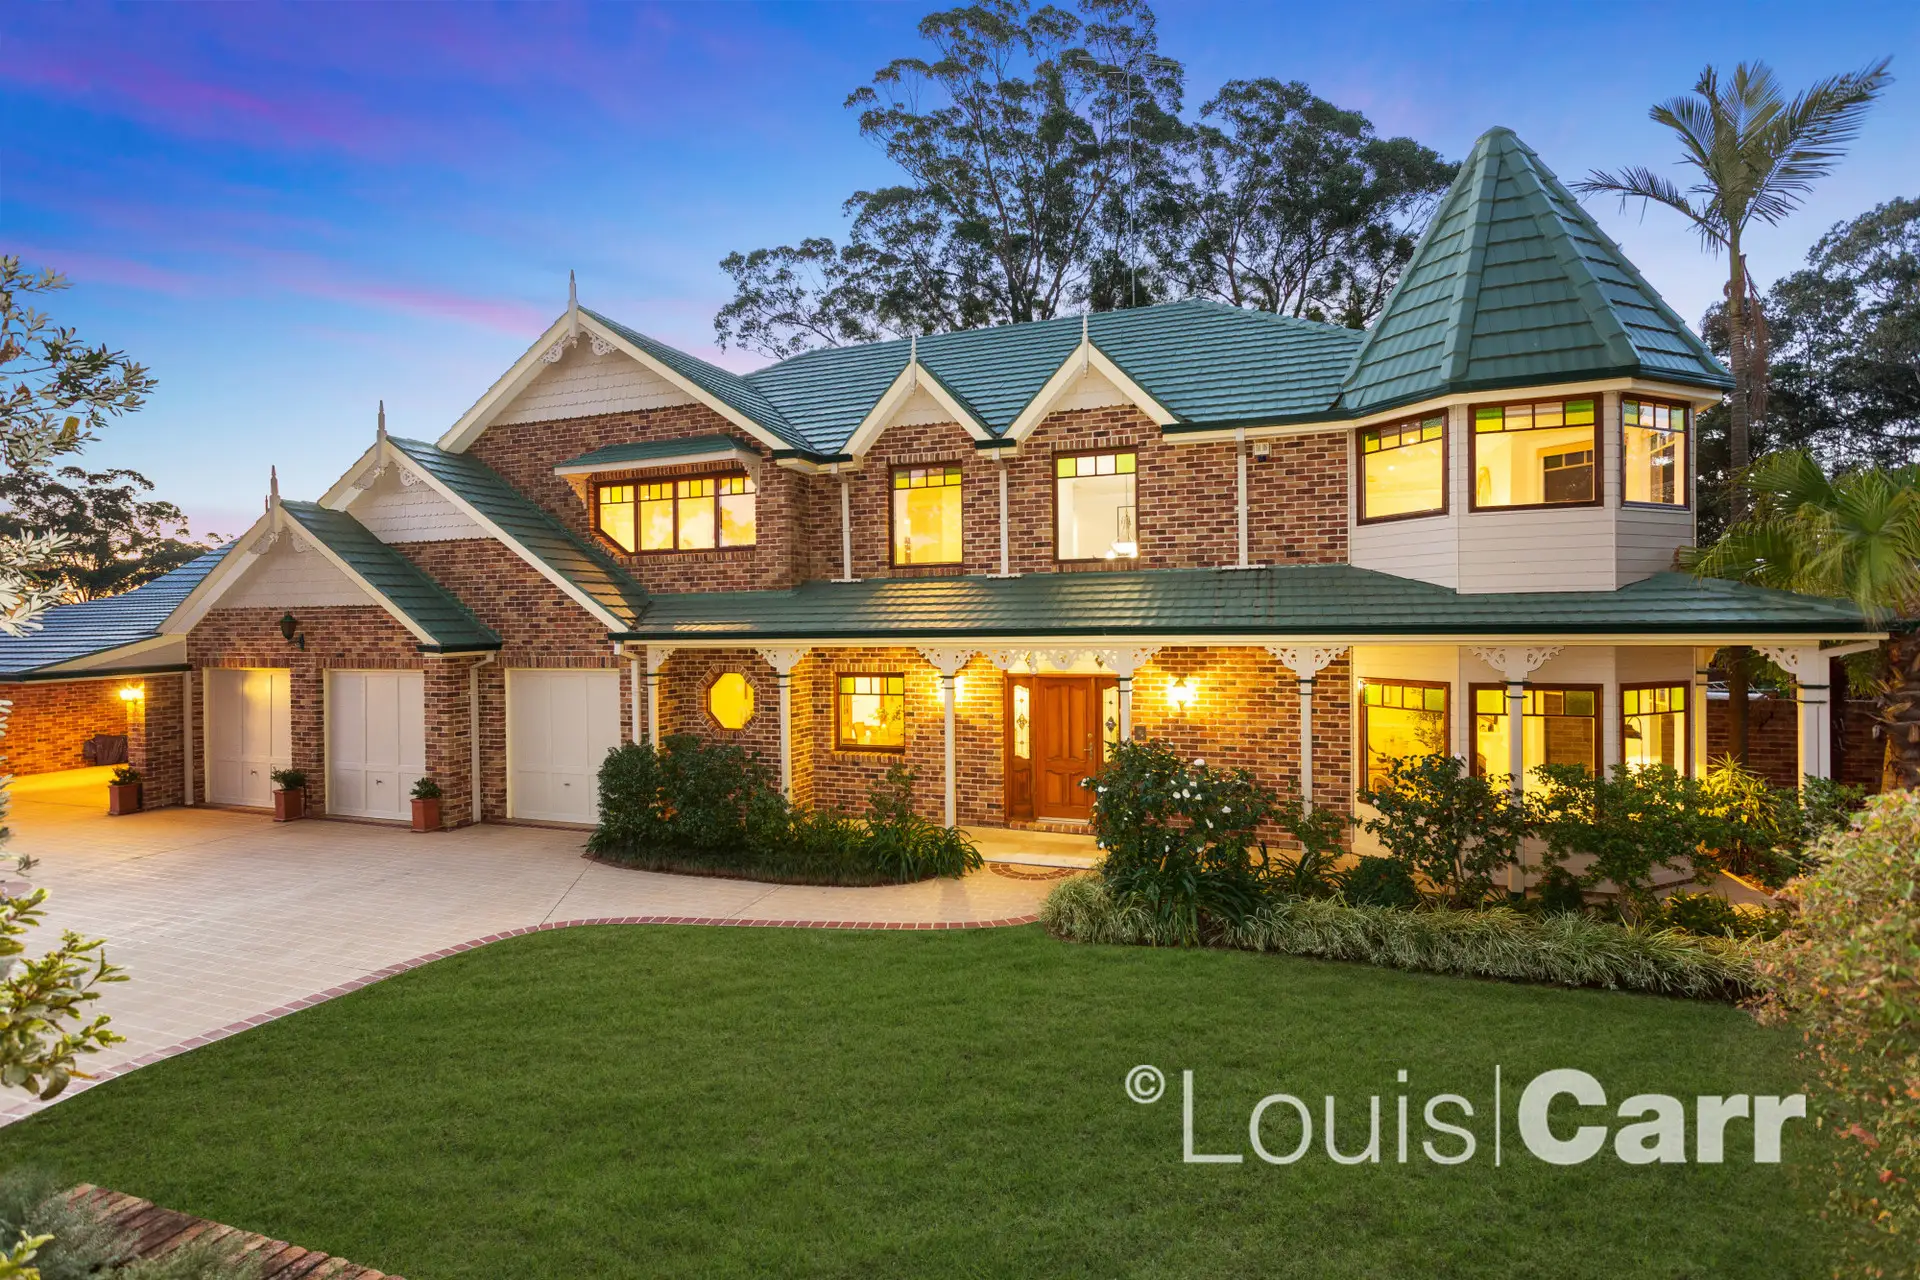 Photo #1: 16 Crego Road, Glenhaven - Sold by Louis Carr Real Estate